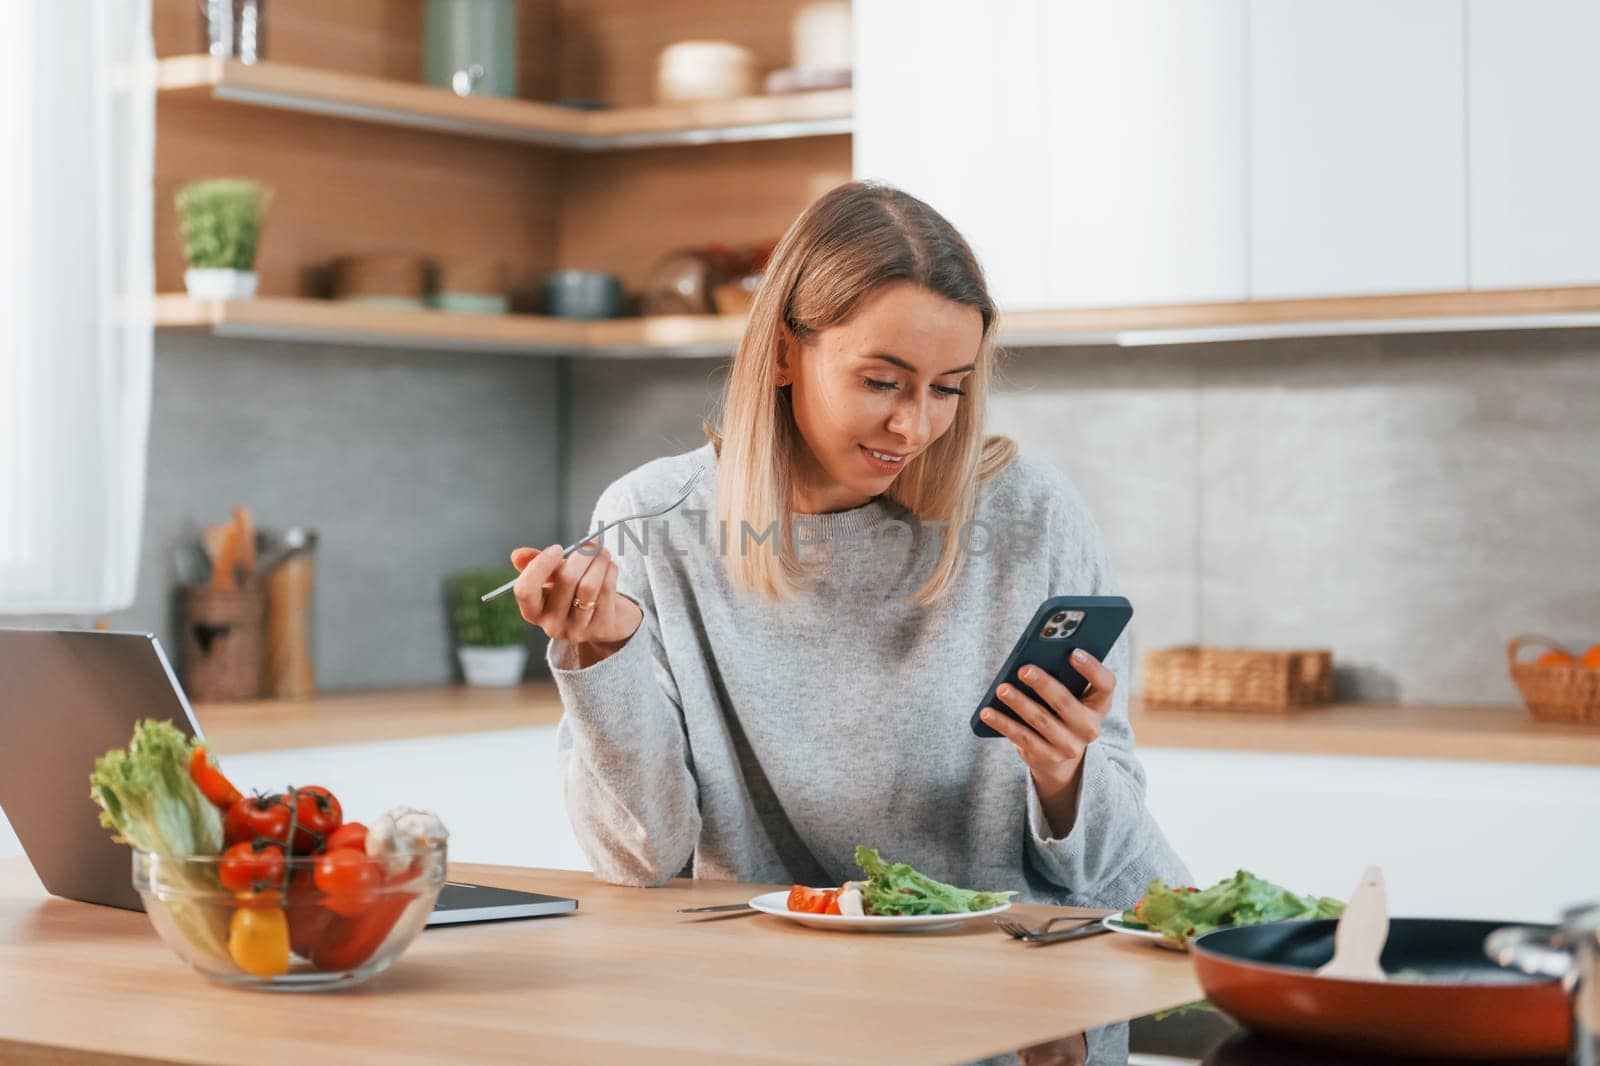 Holding phone. Woman preparing food at home on the modern kitchen by Standret